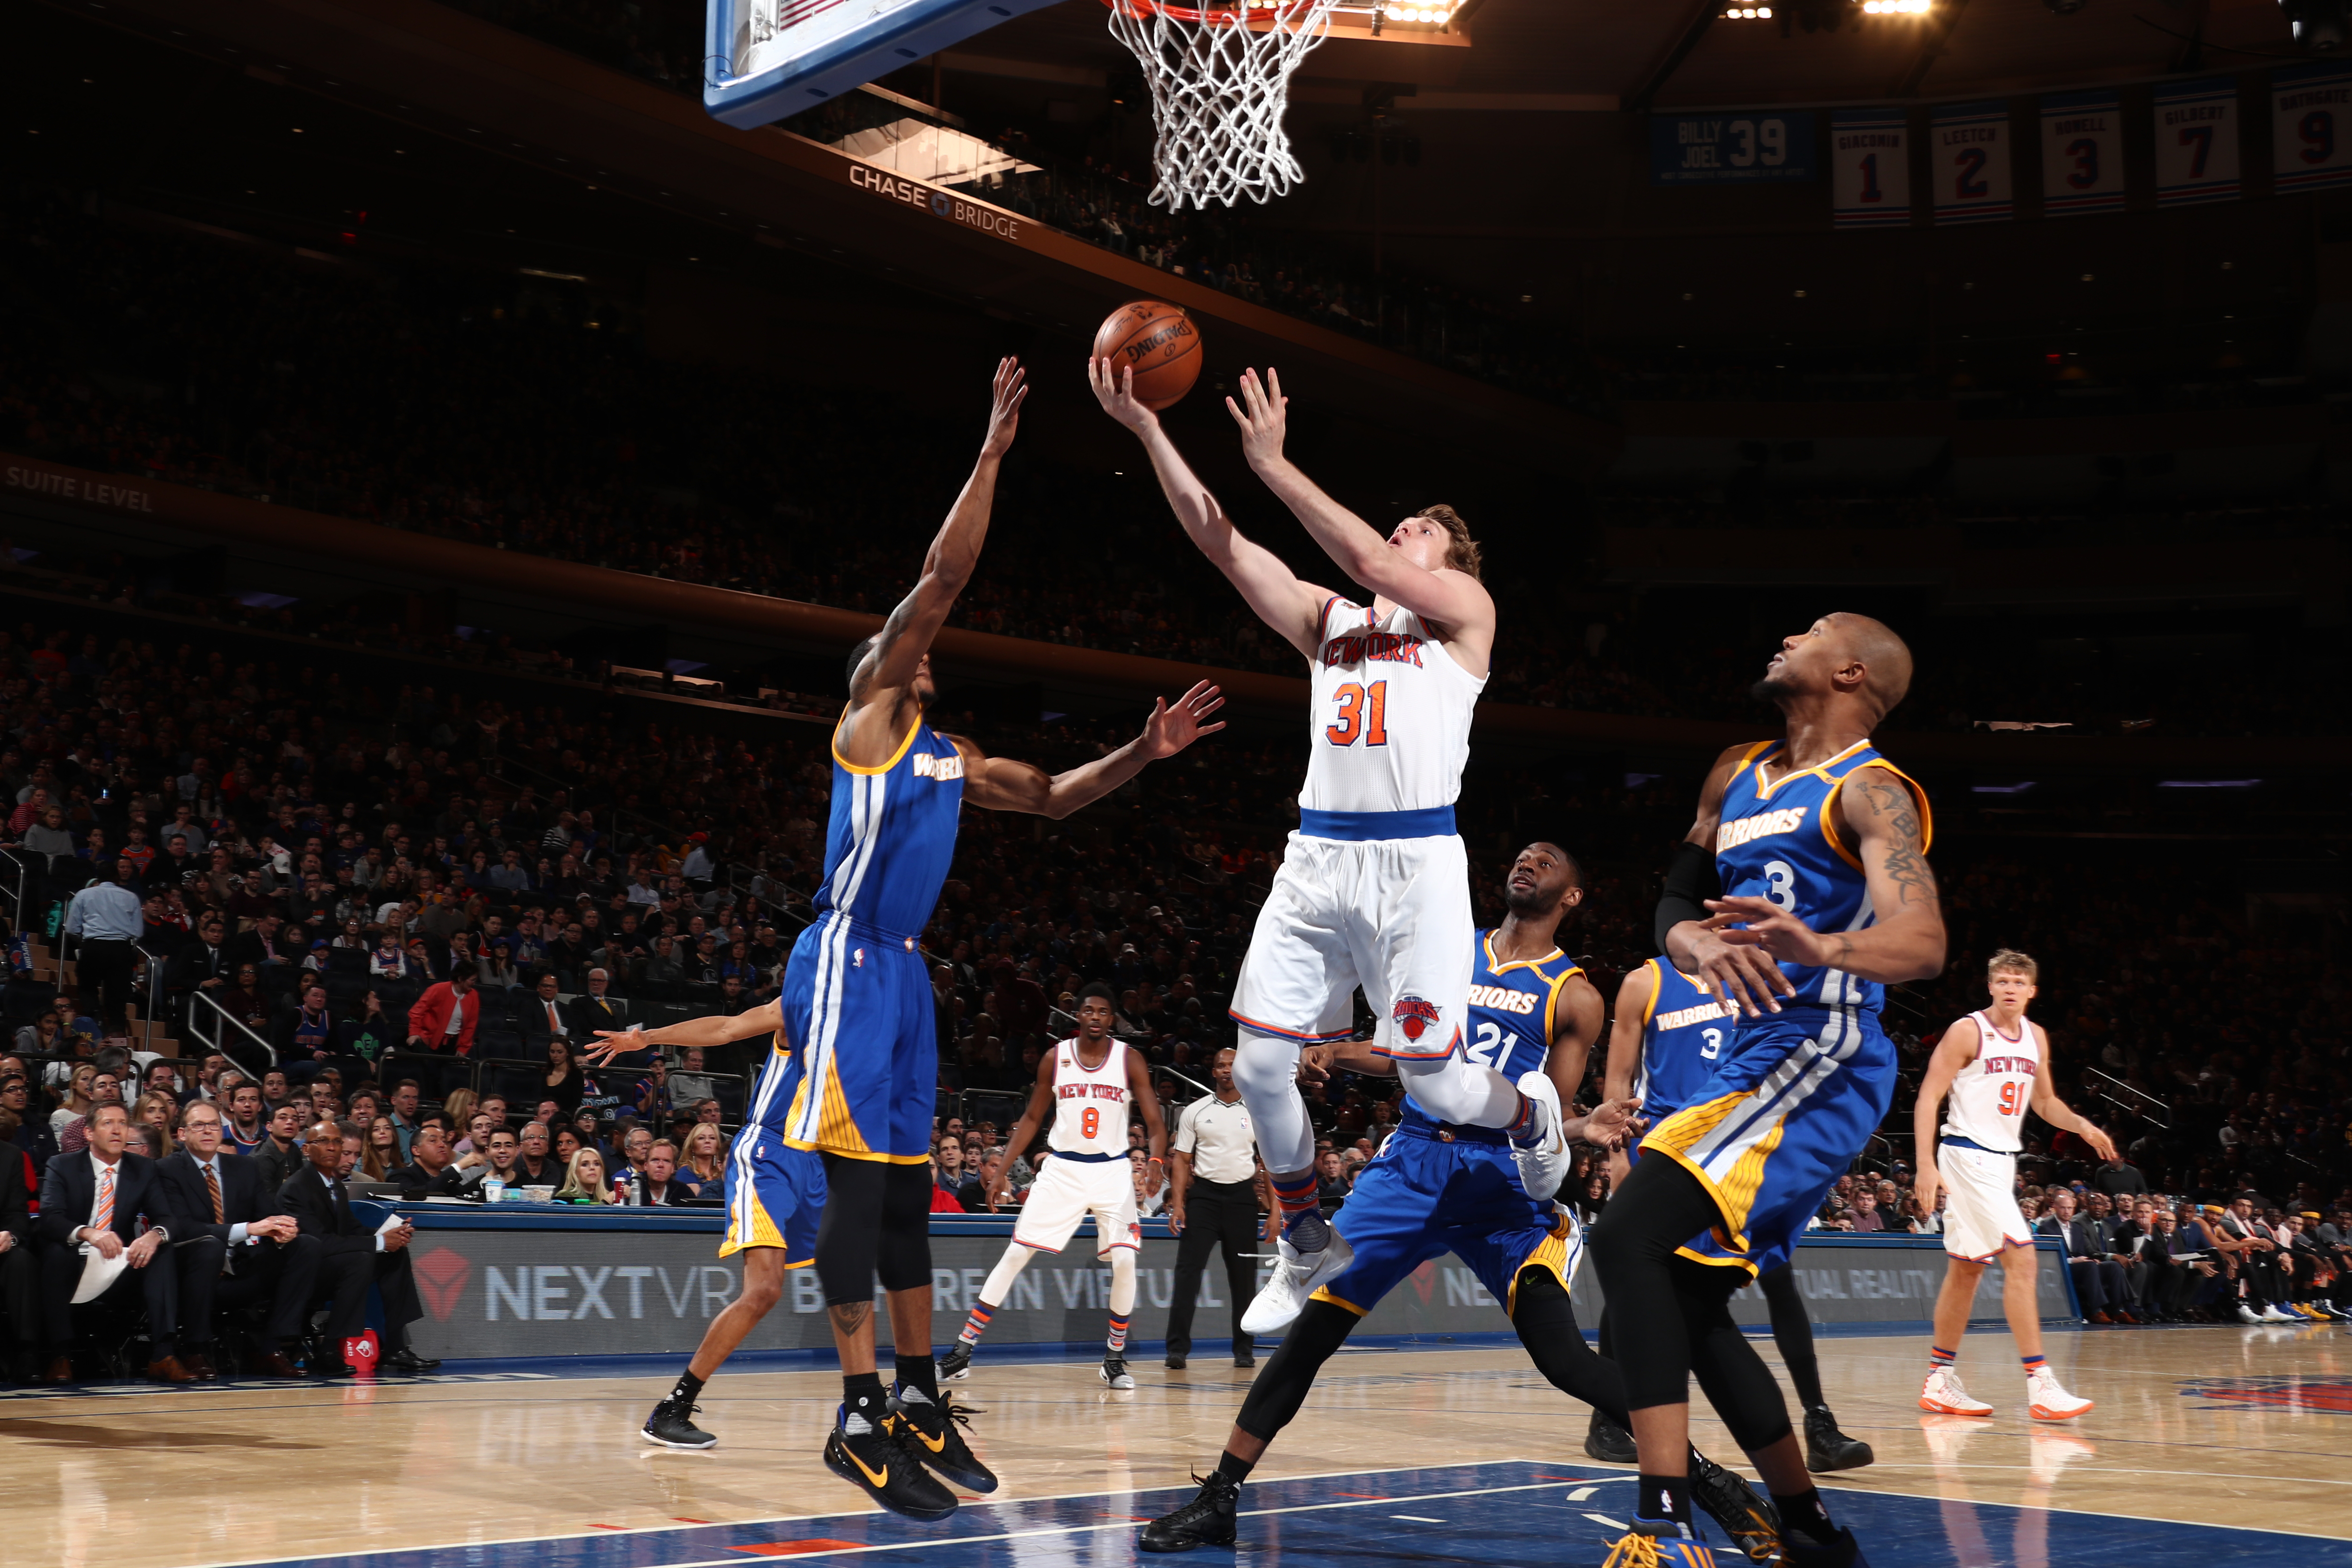 NEW YORK, NY - MARCH 5: Ron Baker #31 of the New York Knicks shoots the ball against the Golden State Warriors on March 5, 2017 at Madison Square Garden in New York City, New York. NOTE TO USER: User expressly acknowledges and agrees that, by downloading and or using this photograph, User is consenting to the terms and conditions of the Getty Images License Agreement. Mandatory Copyright Notice: Copyright 2017 NBAE (Photo by Nathaniel S. Butler/NBAE via Getty Images)